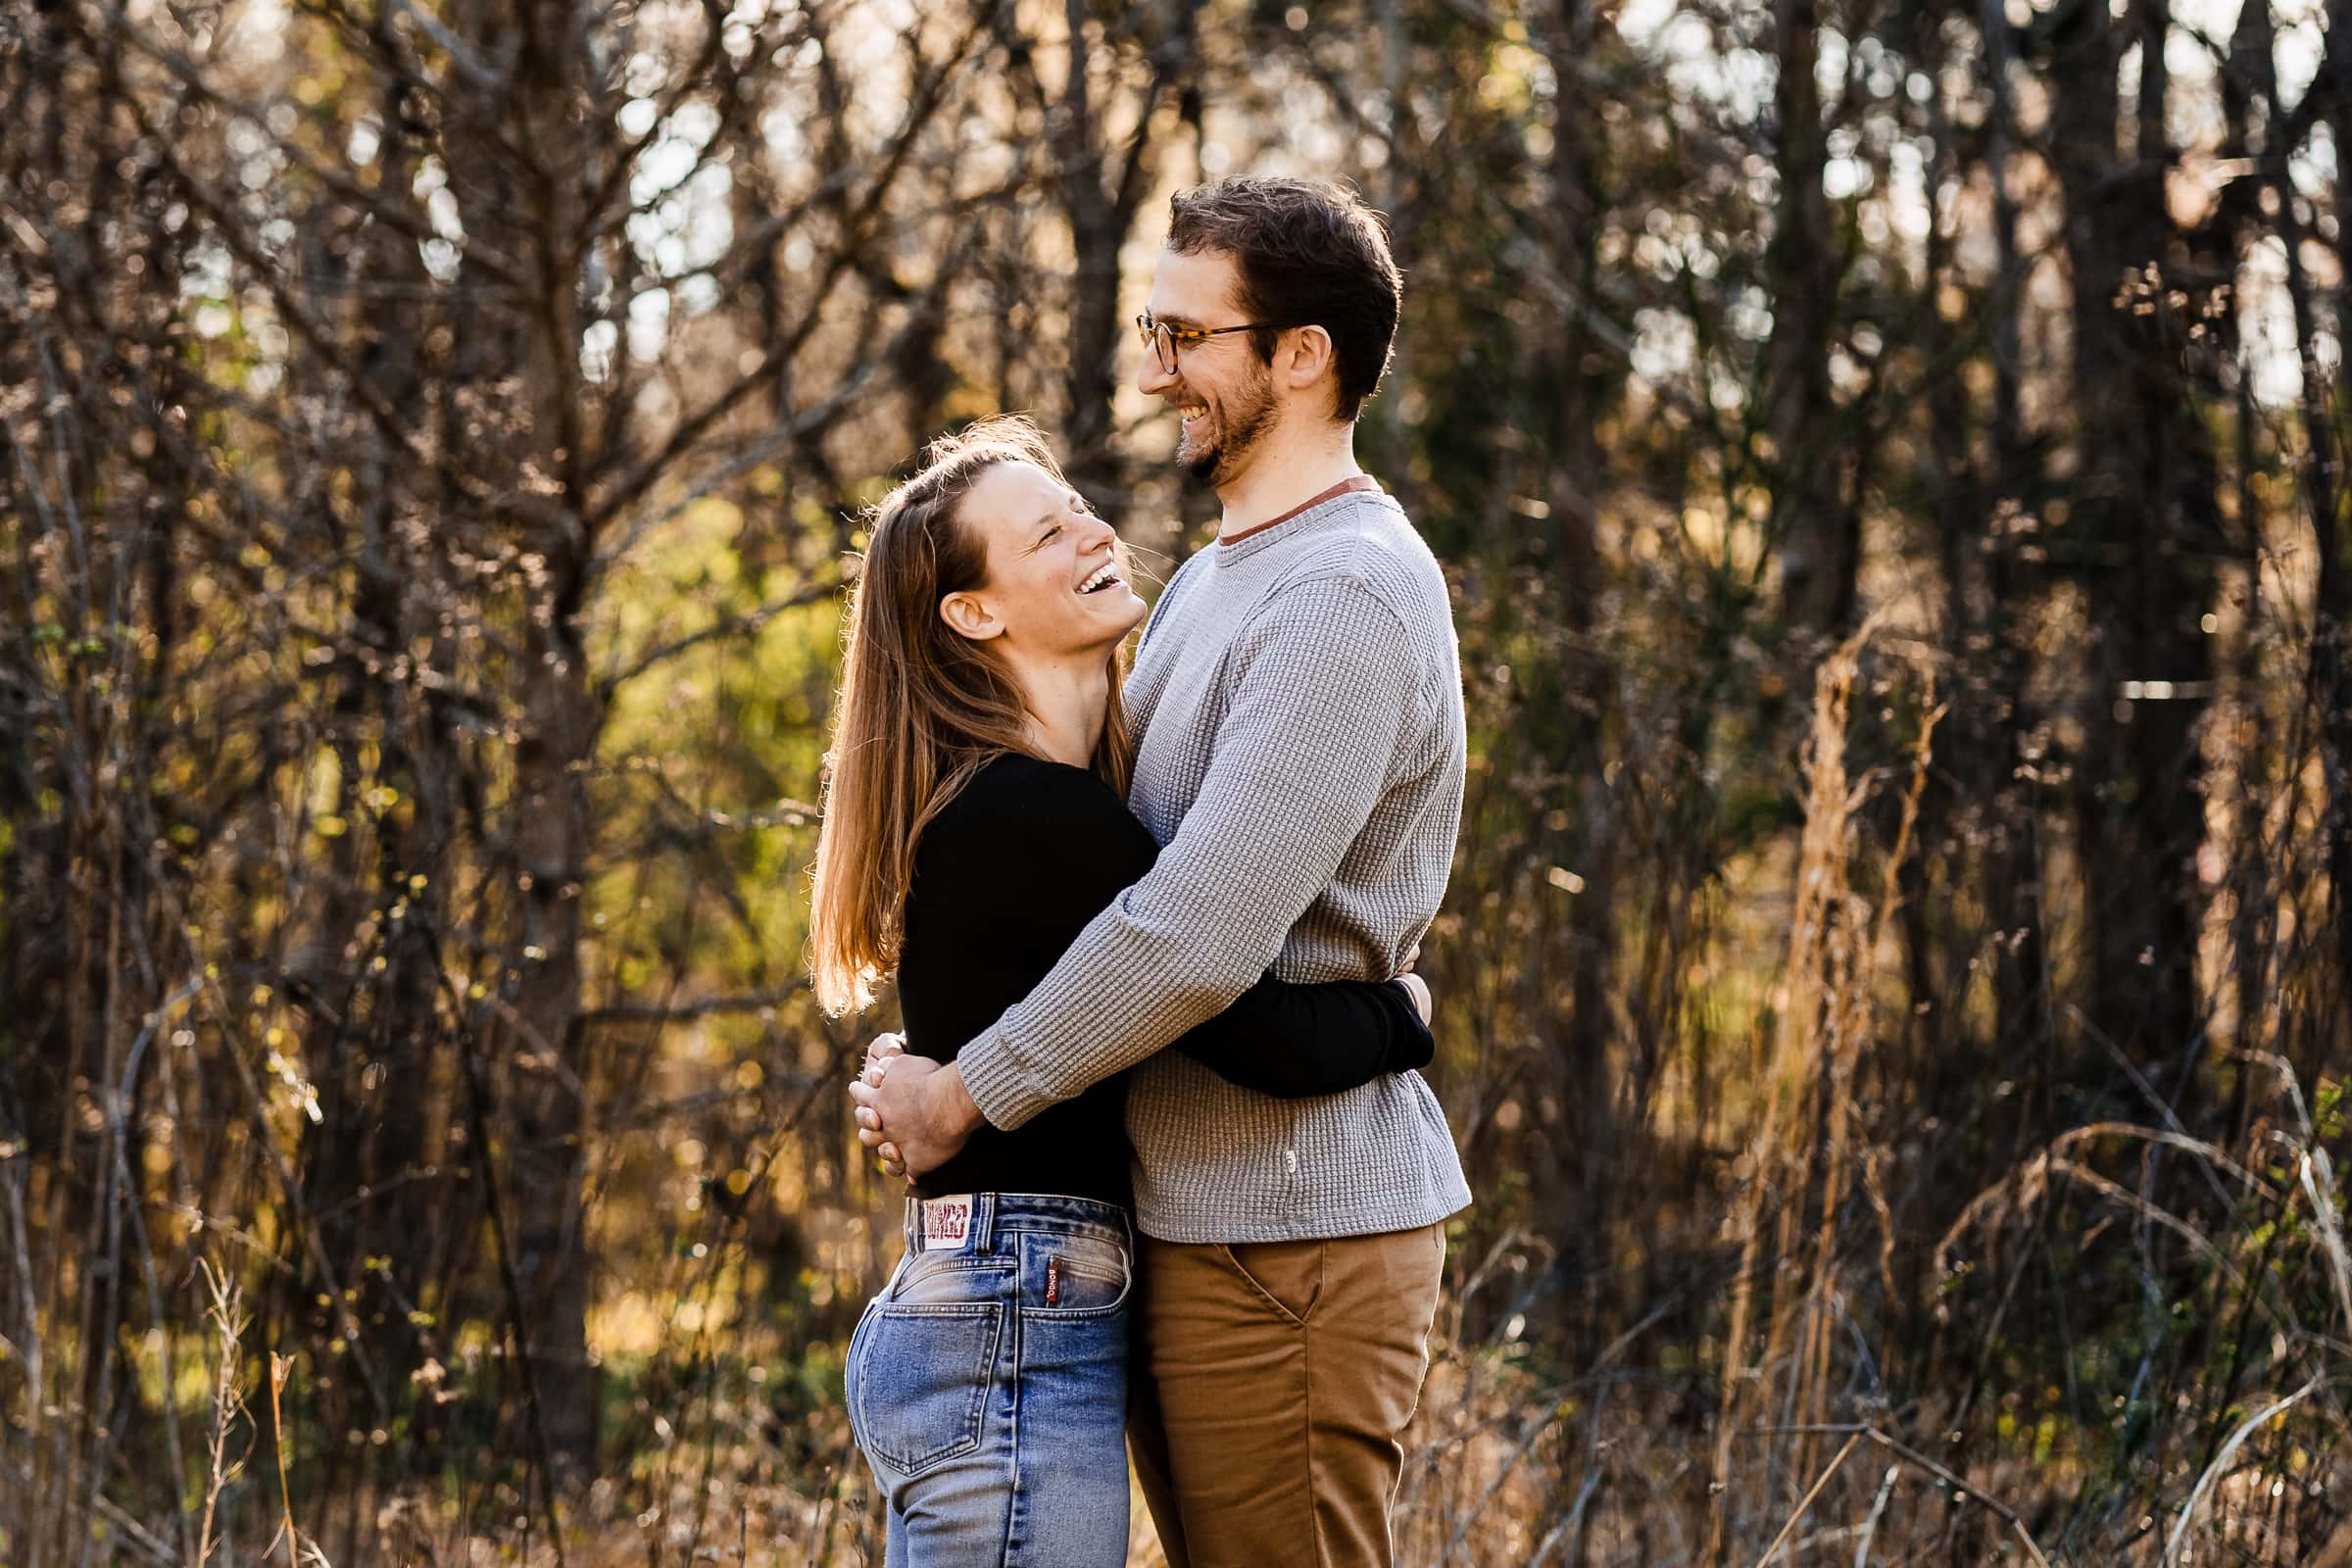 check out nearby nature parks for your engagement photos | photos by Kivus & Camera, Durham, NC wedding photographer